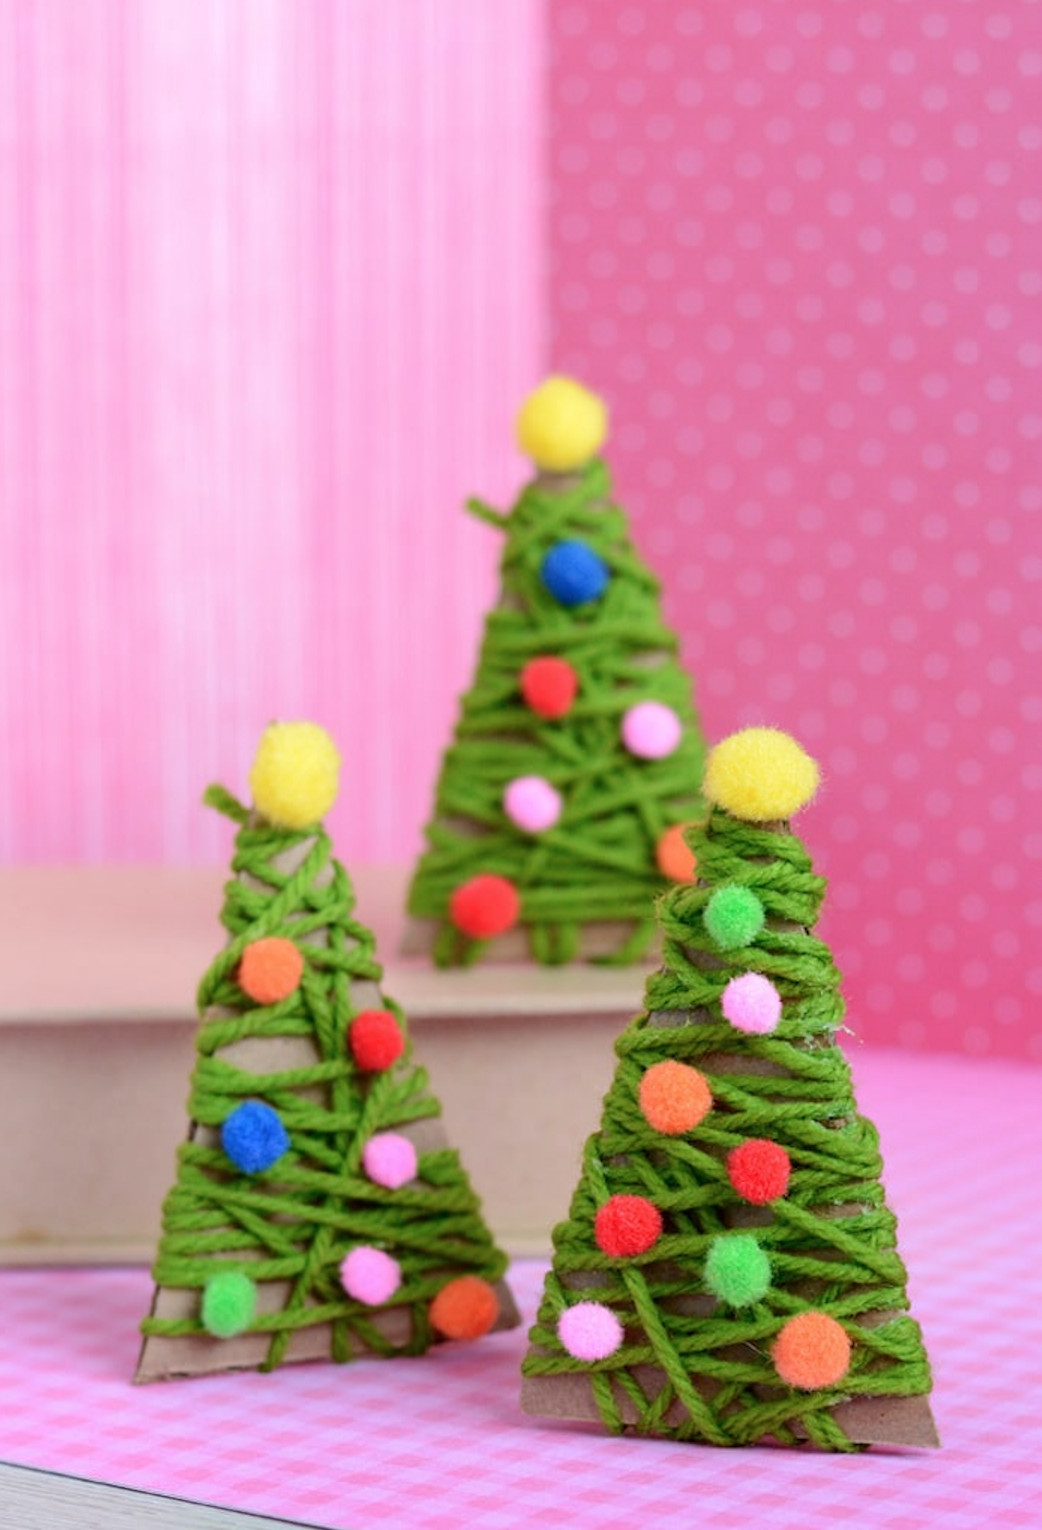 DIY Christmas Craft For Kids
 DIY Christmas Ornament Crafts for Kids A Little Craft In